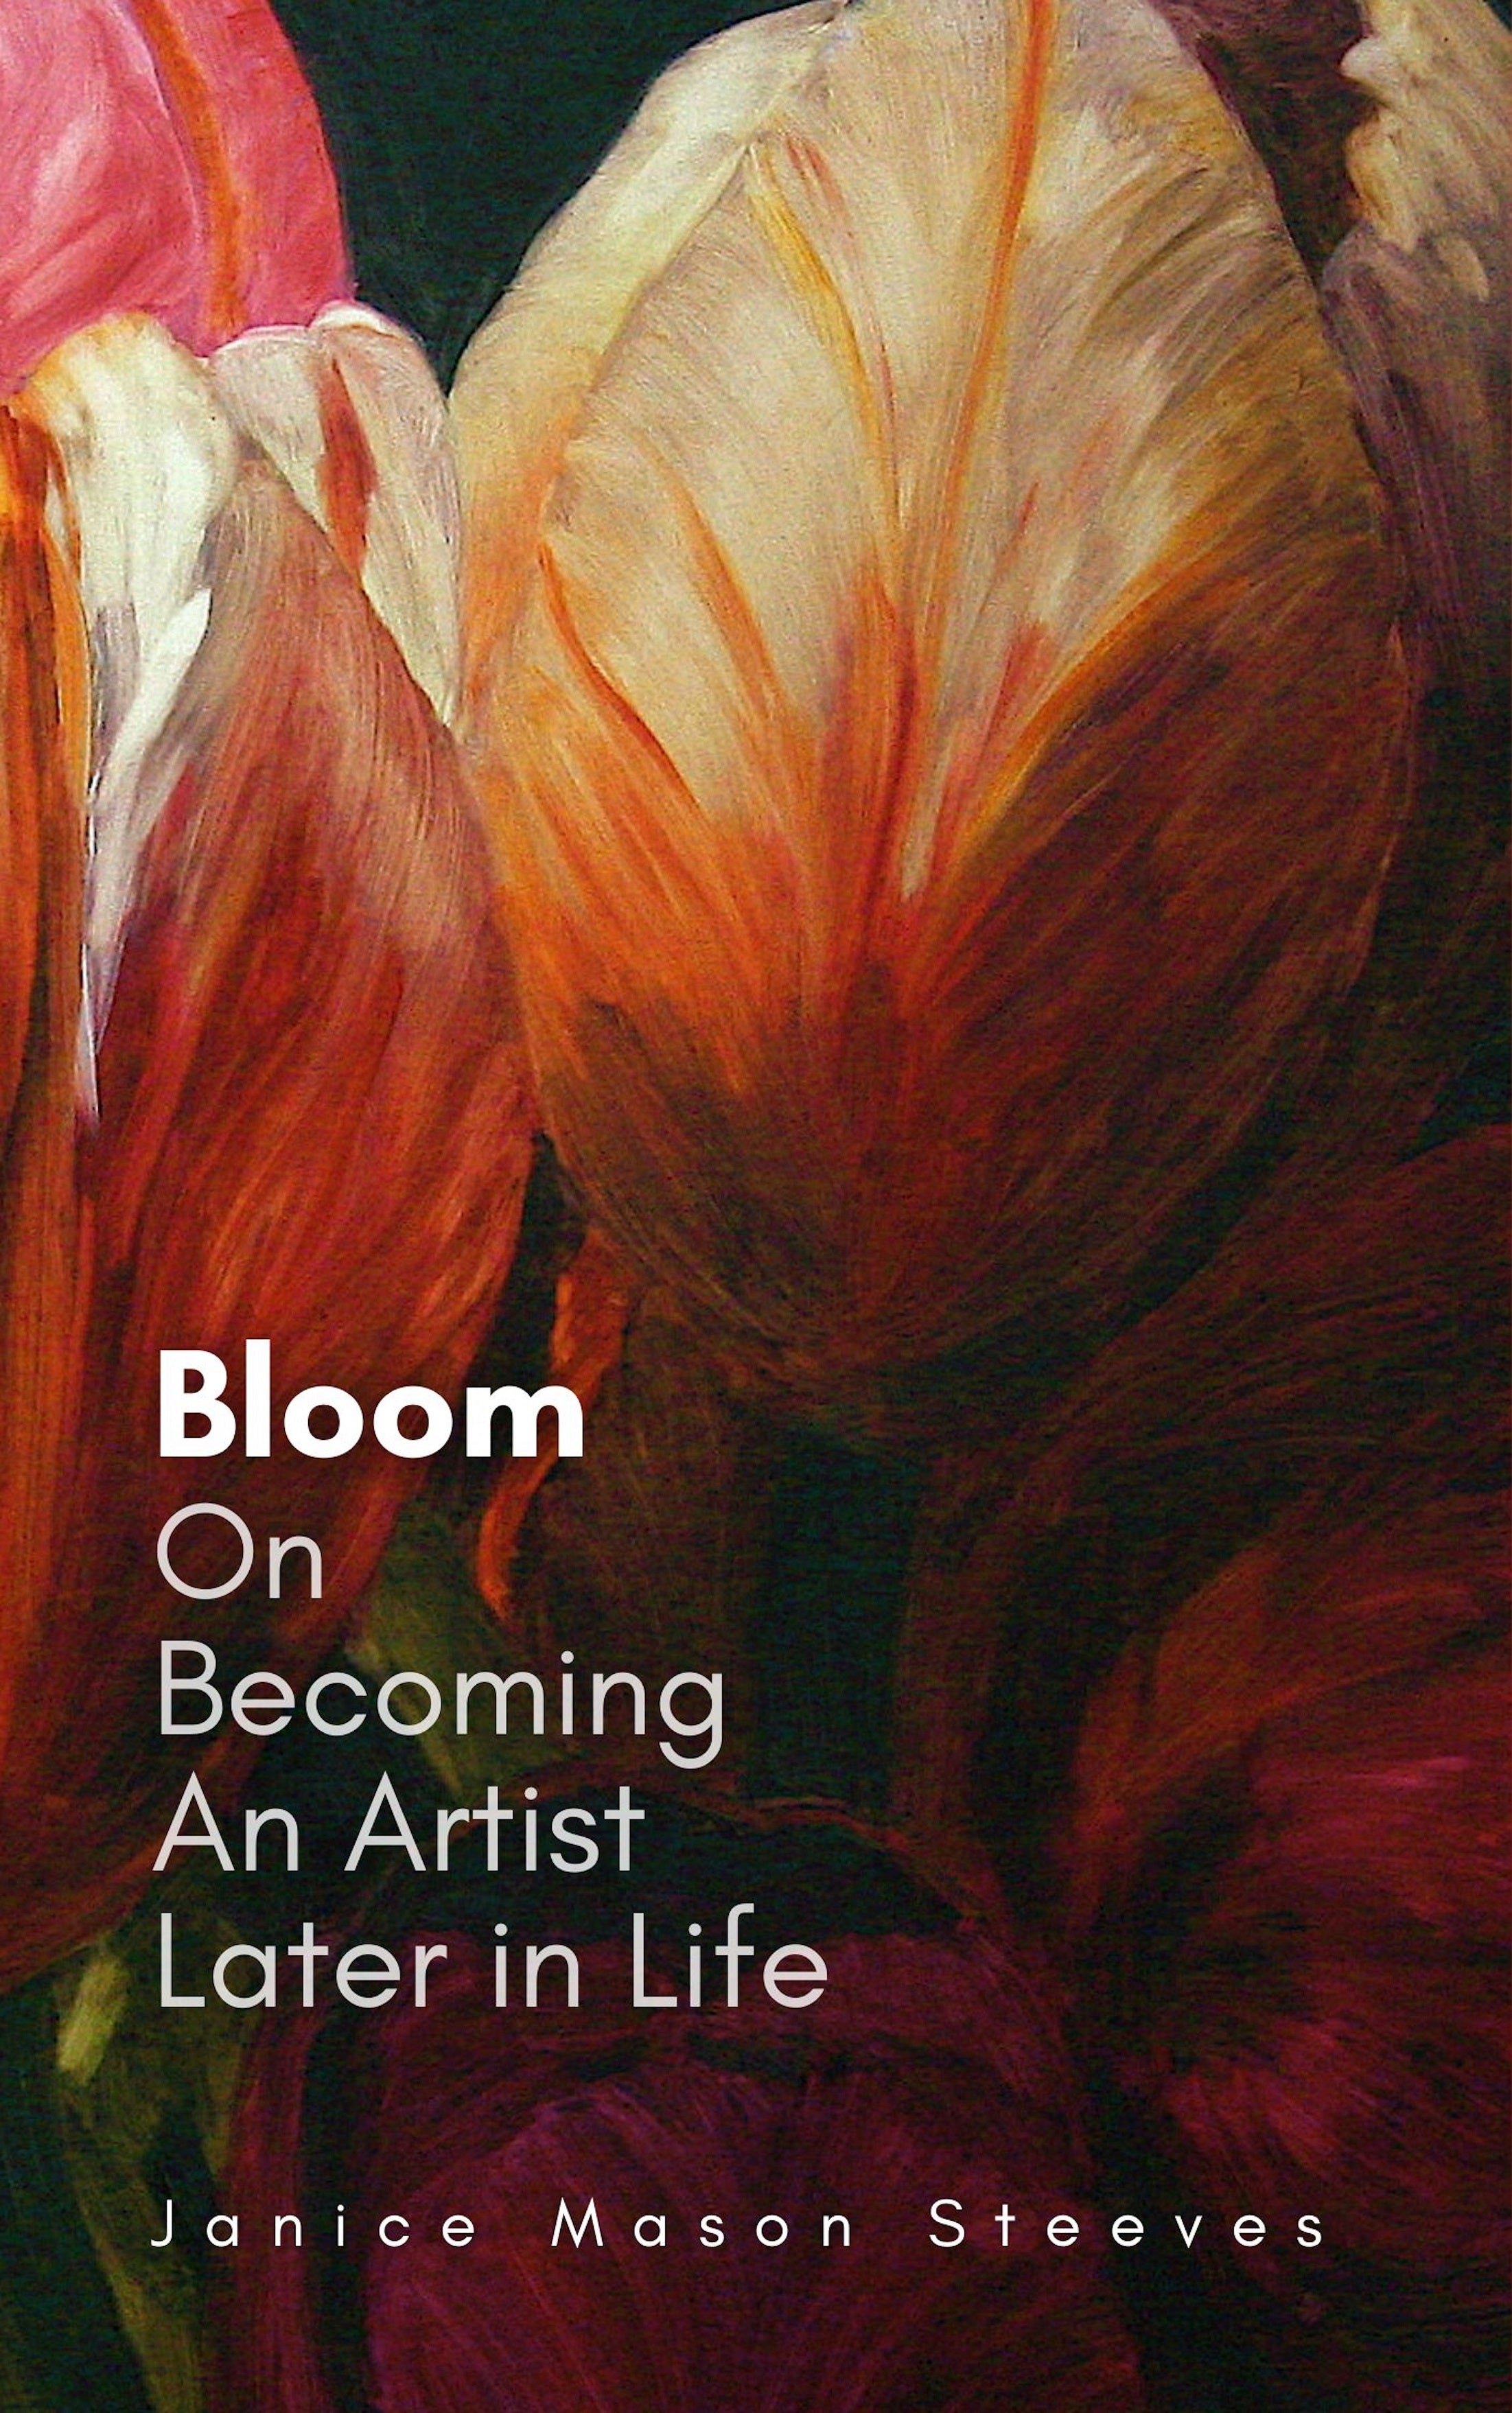 Bloom: On Becoming An Artist Later in Life By Janice Mason Steeves